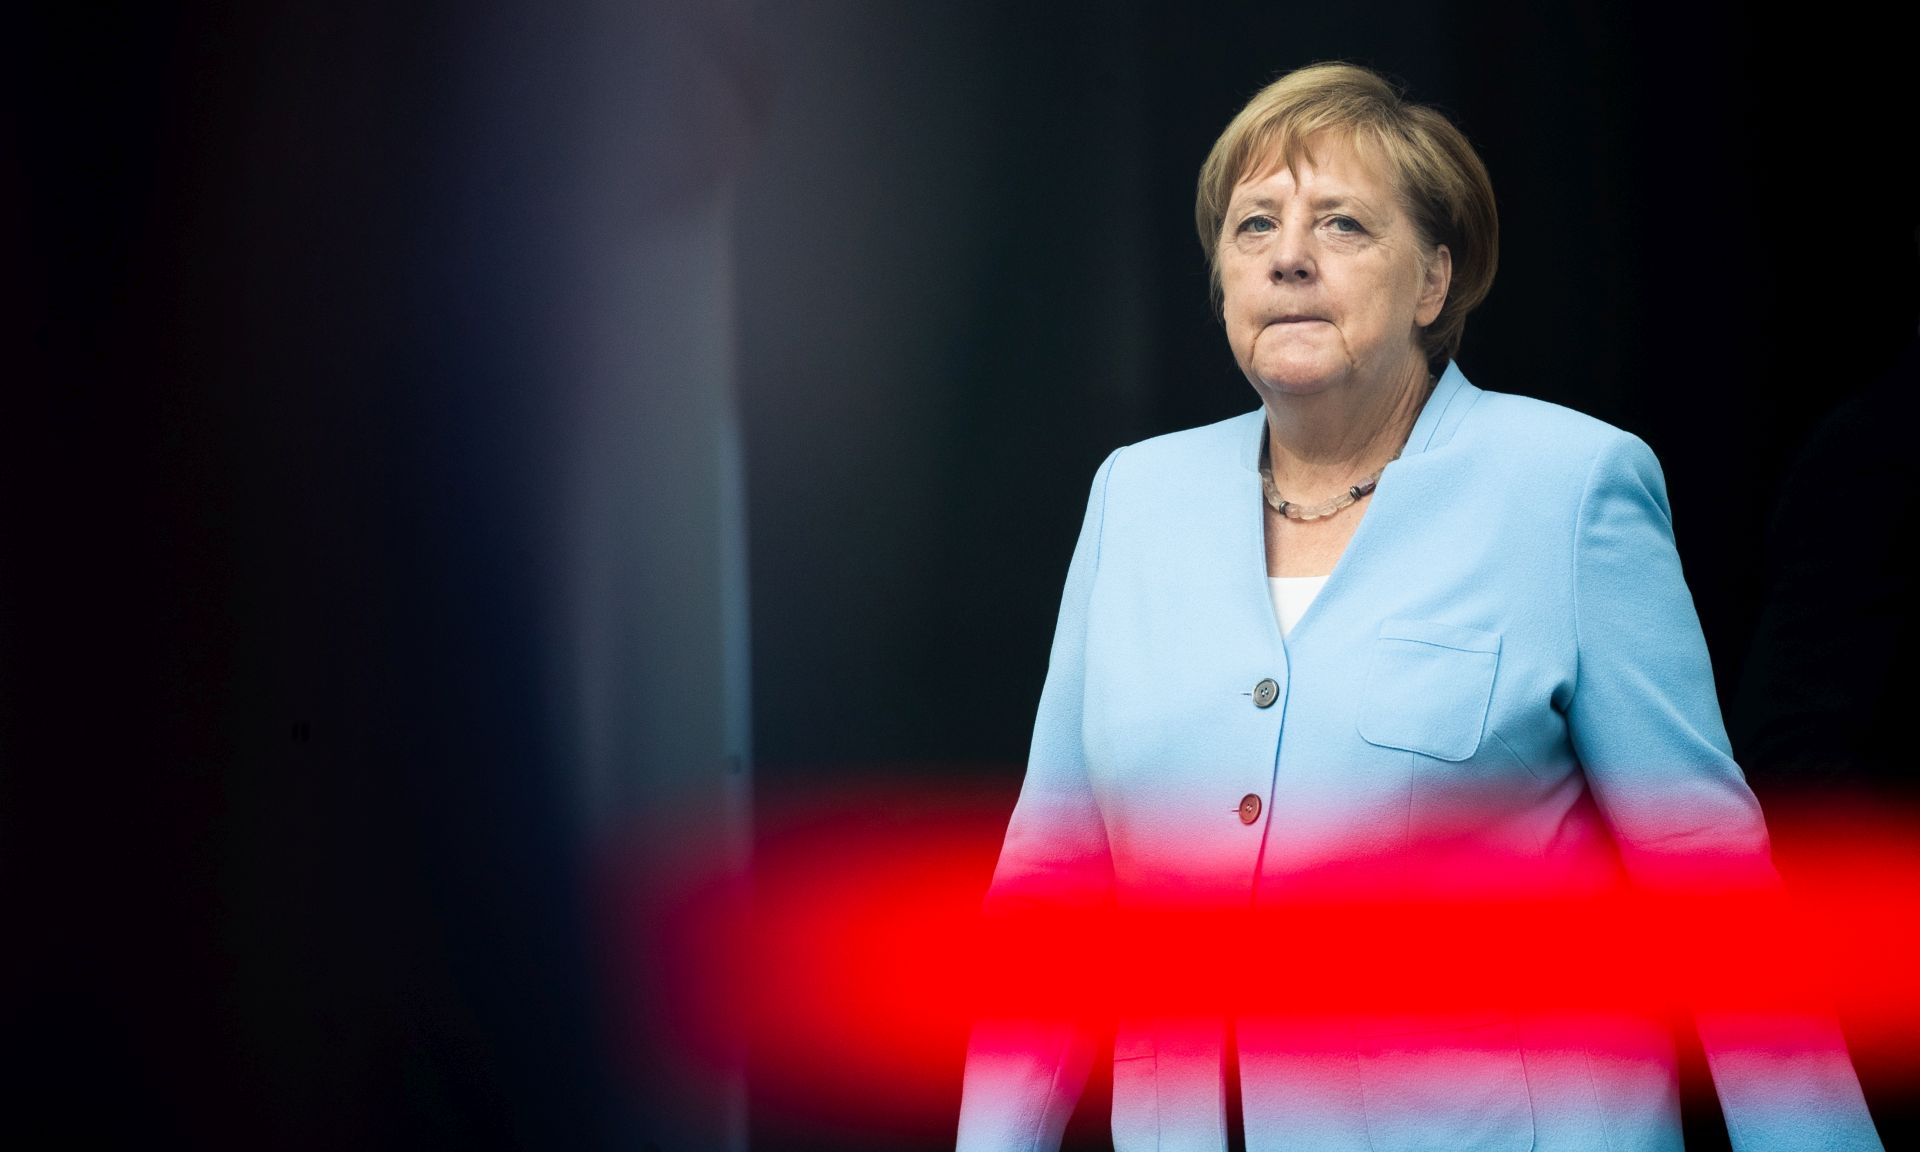 epa07772775 German Chancellor Angela Merkel prior to a reception with military honors at the Chancellery in Berlin, Germany, 14 August 2019. President of the Republic of Lithuania, Gitanas Nauseda visits the German capital to discuss bilateral issues.  EPA/HAYOUNG JEON